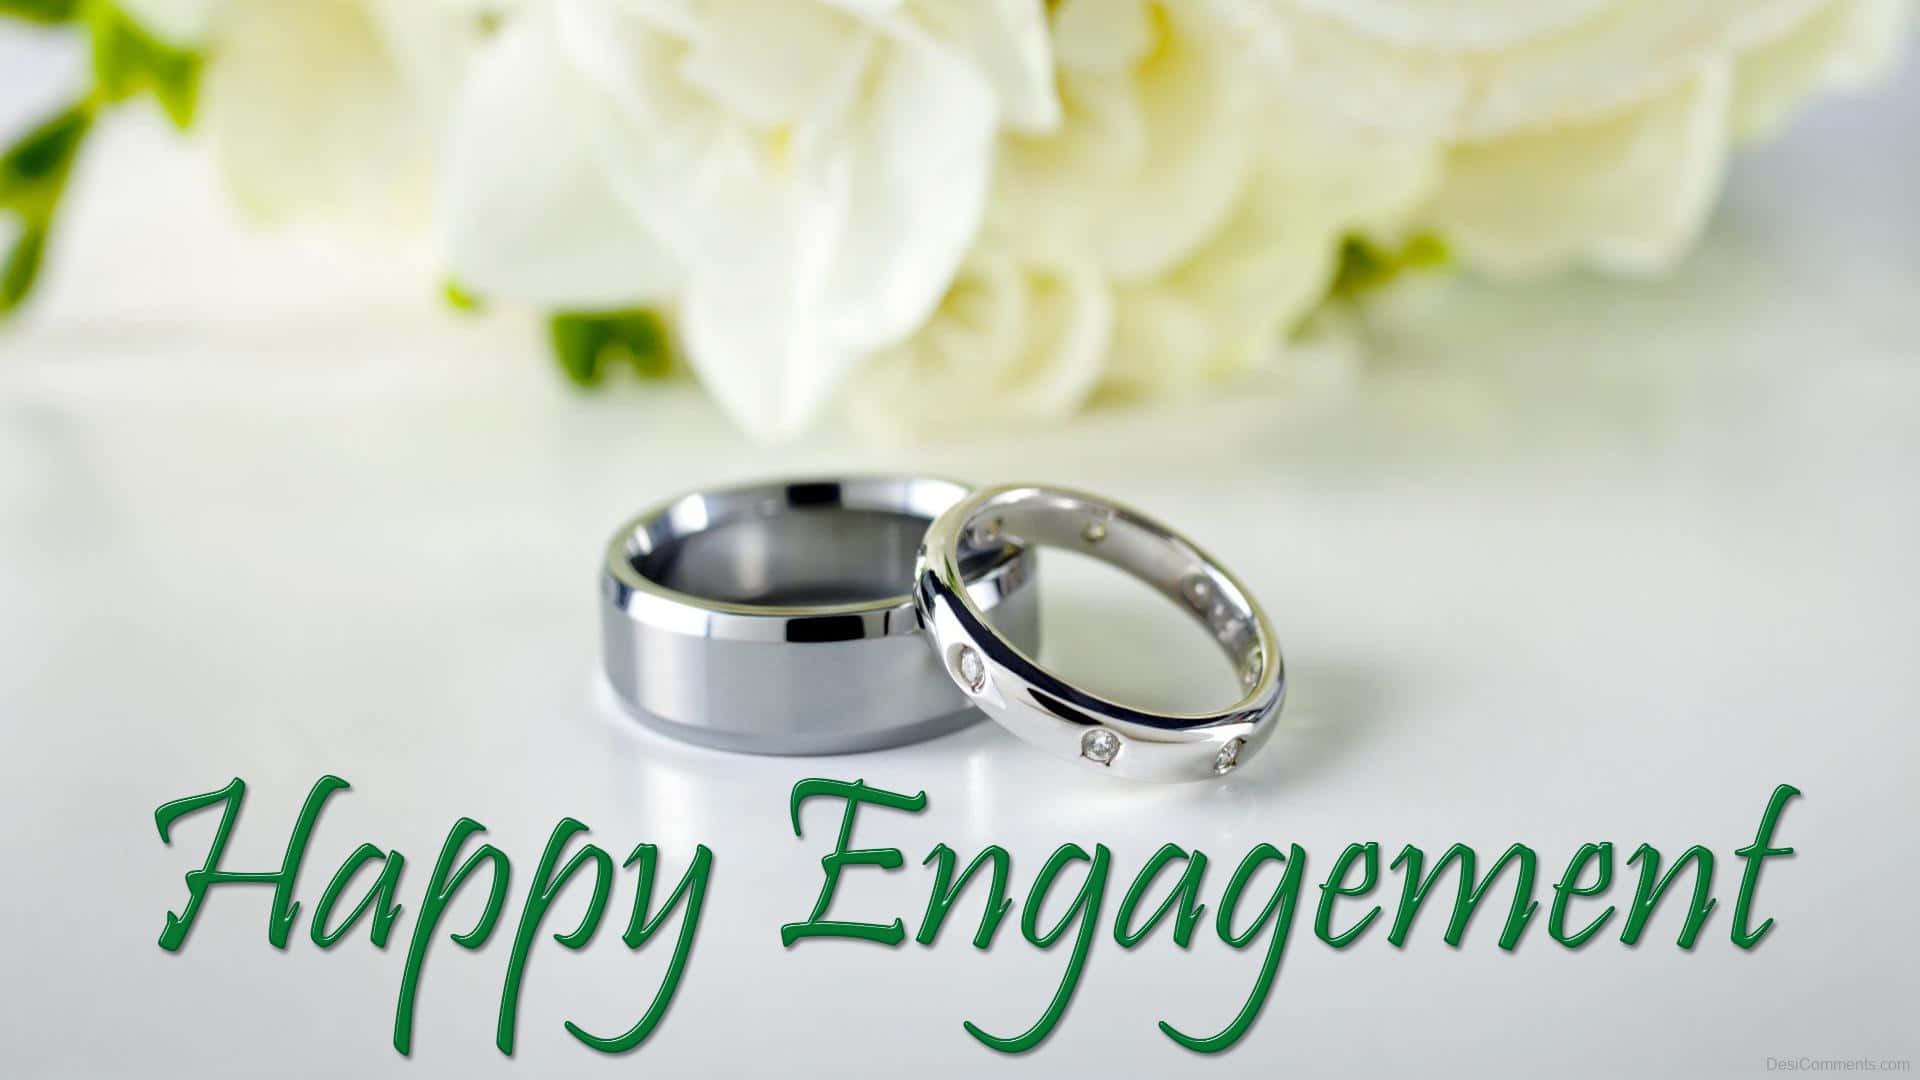 Happy Engagement Greeting Card Couple Wallpaper